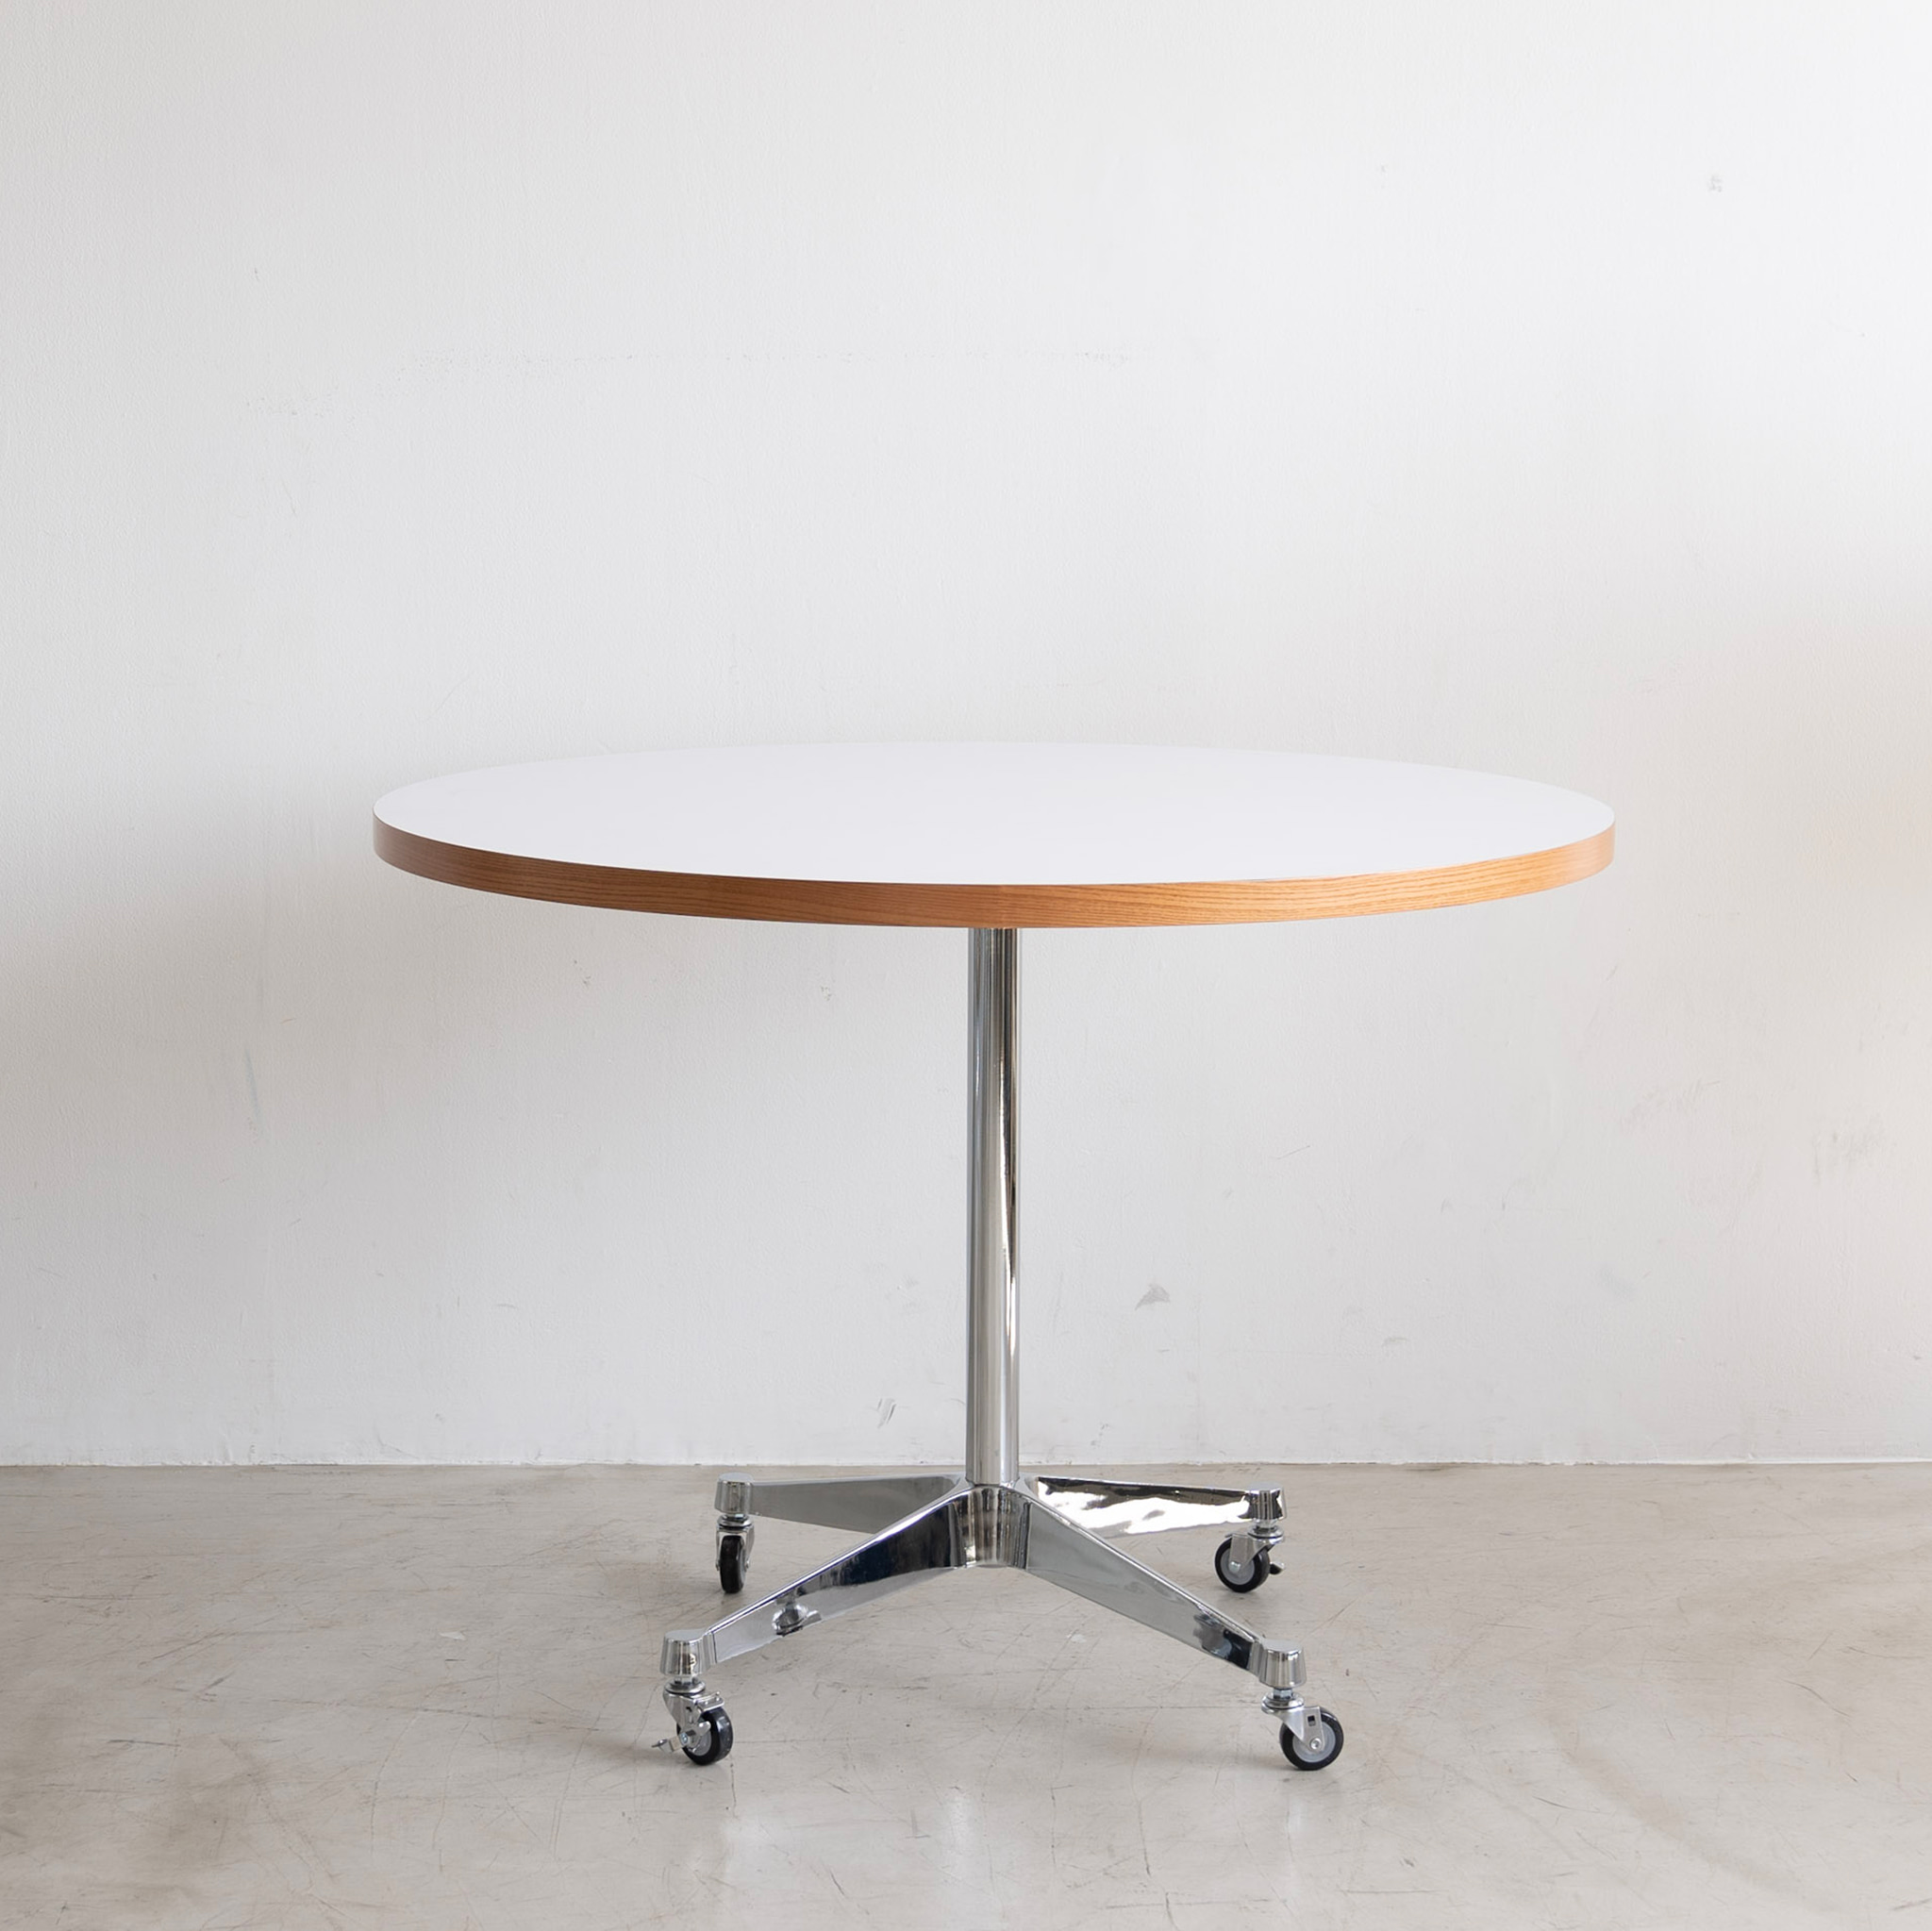 Herman Miller Contract Base Dining and work Table (model 650)